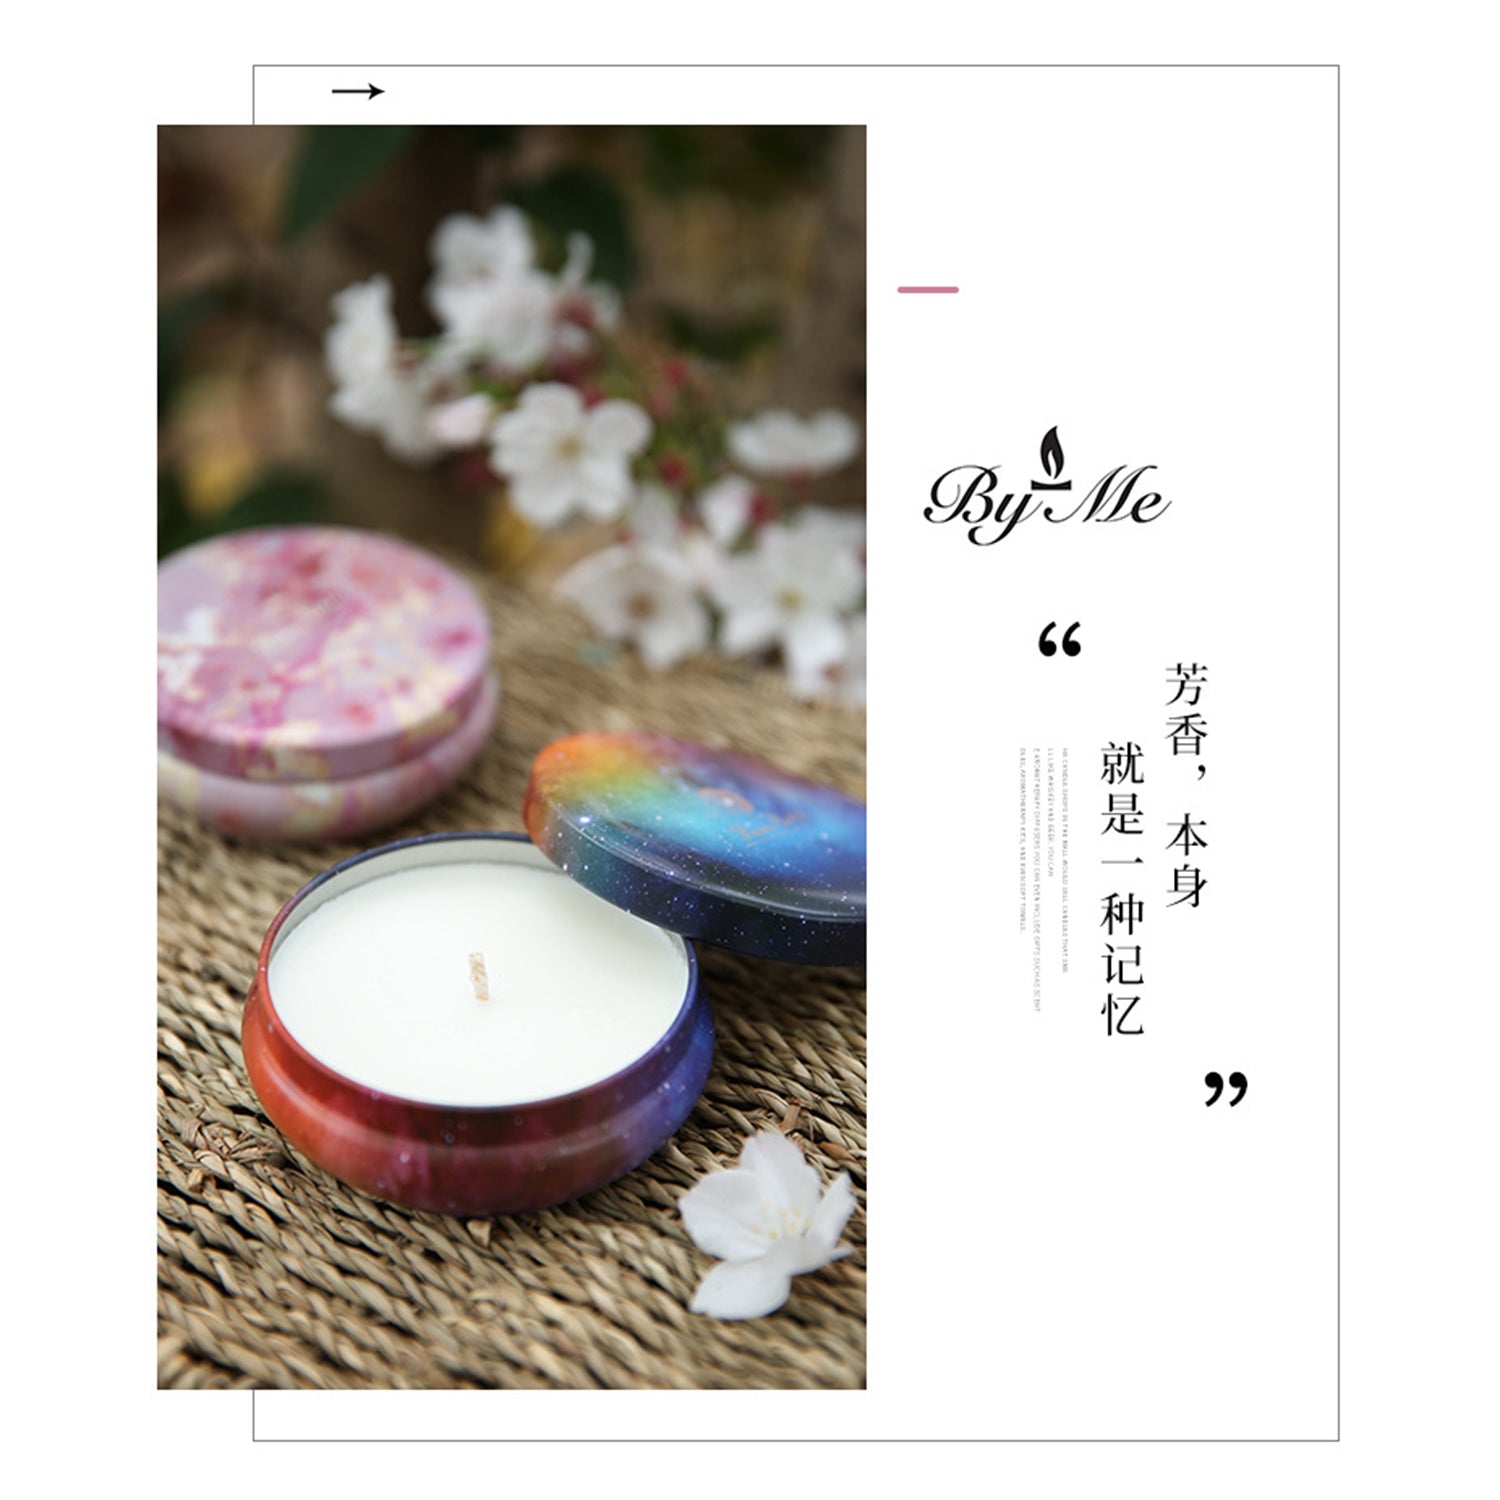 BYME Scented Candle Soy Wax Flat Tin Can Handmade Romantic Aromatherapy Candle Gift Ideas Scented Candle BYME 